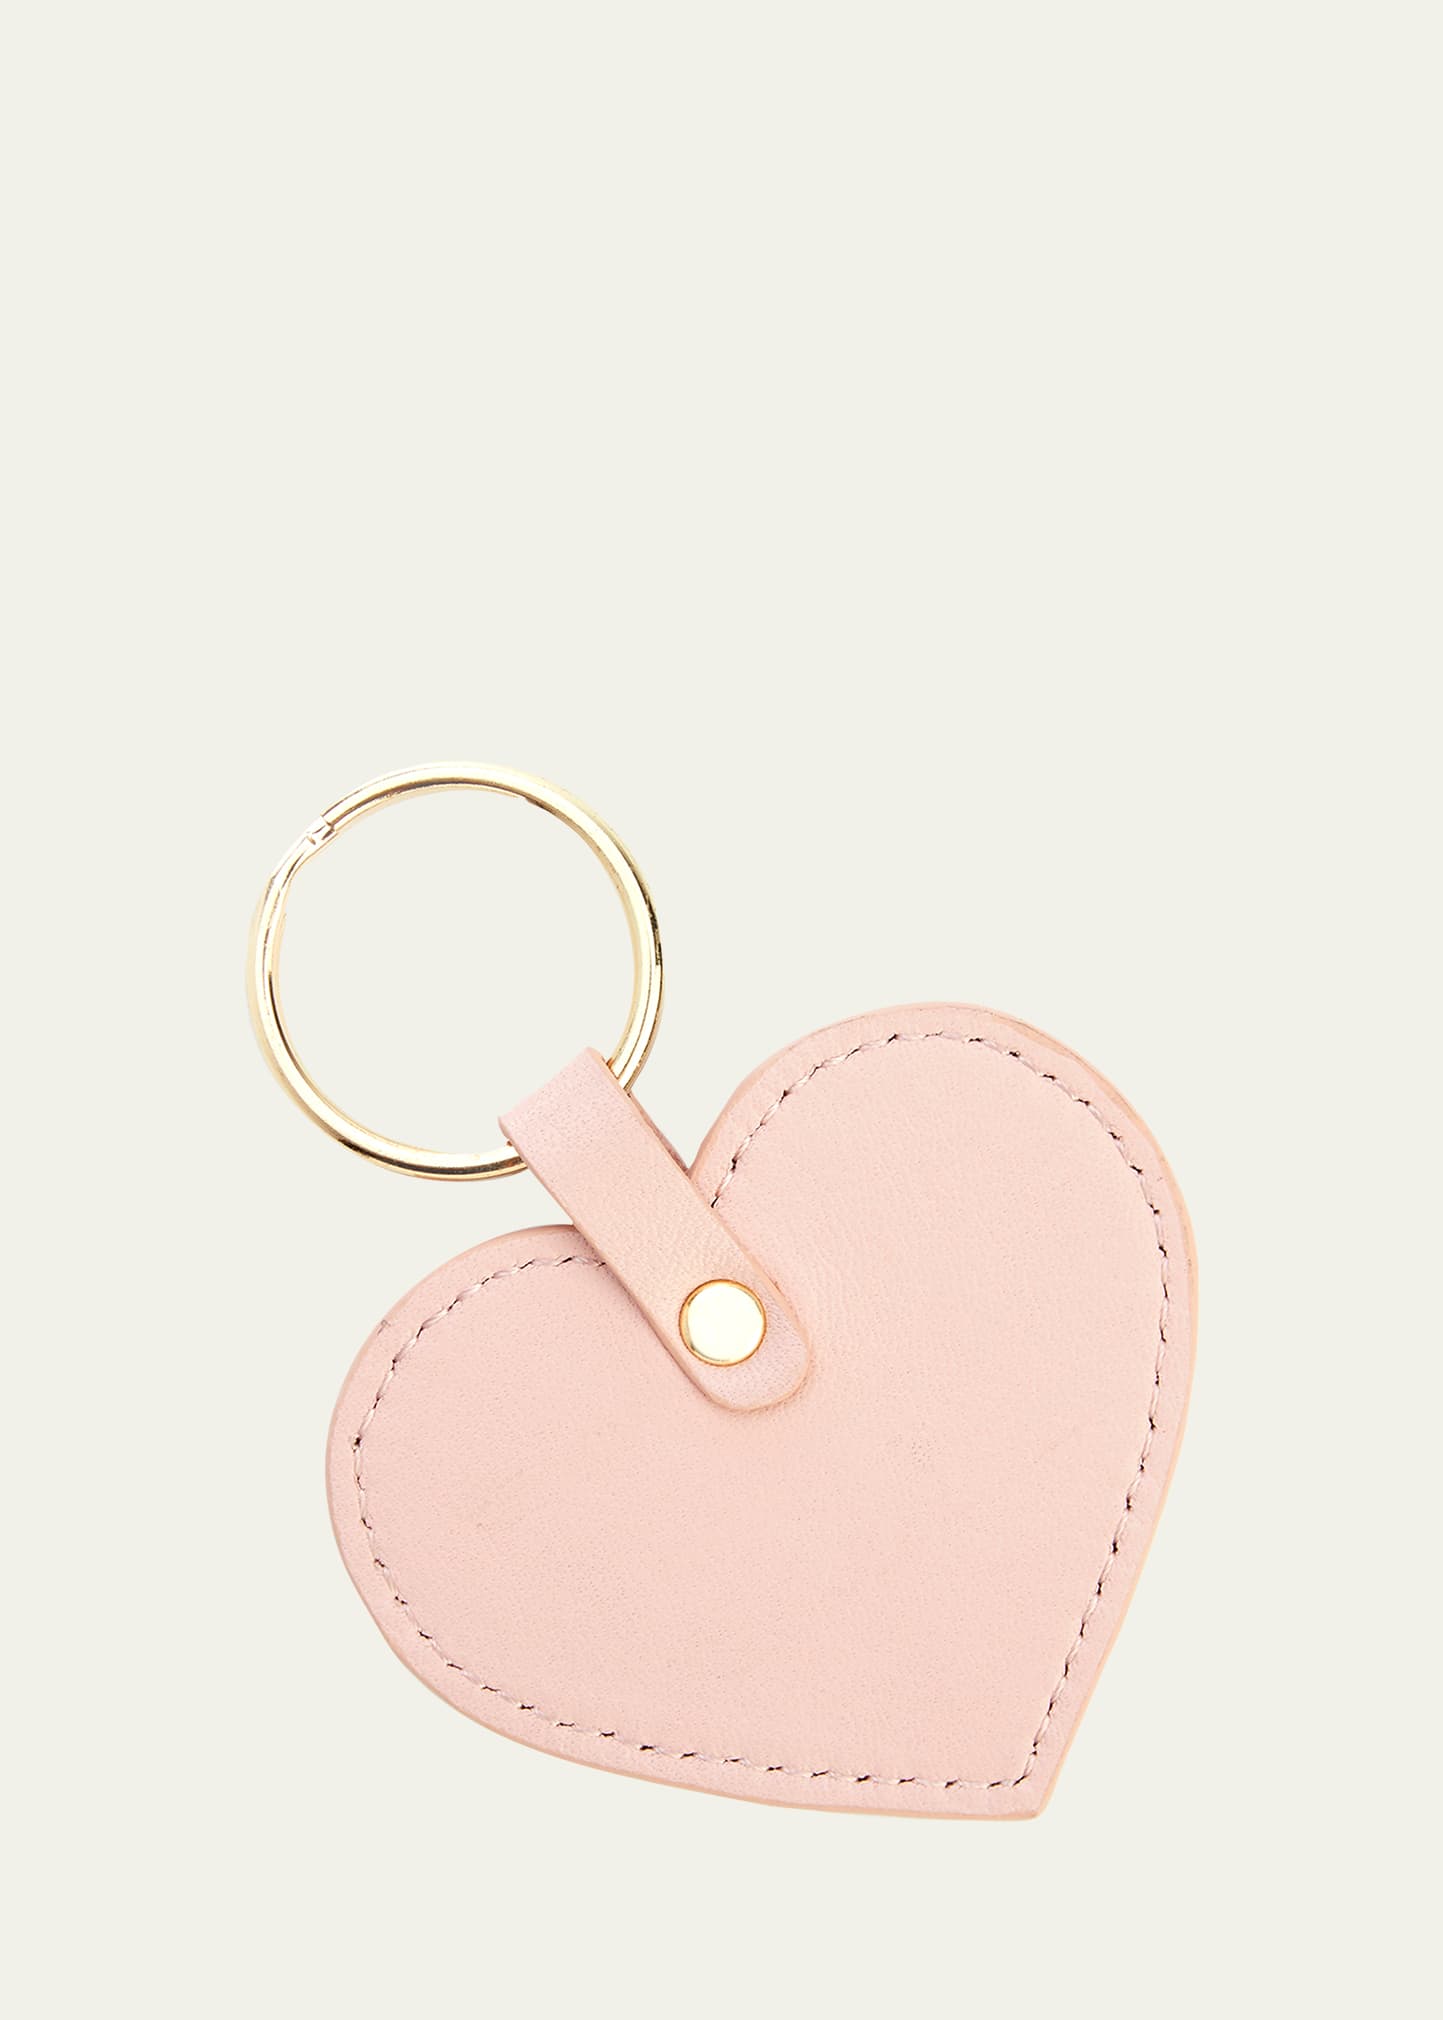 Royce New York Heart-shaped Leather Key Chain In Light Pink